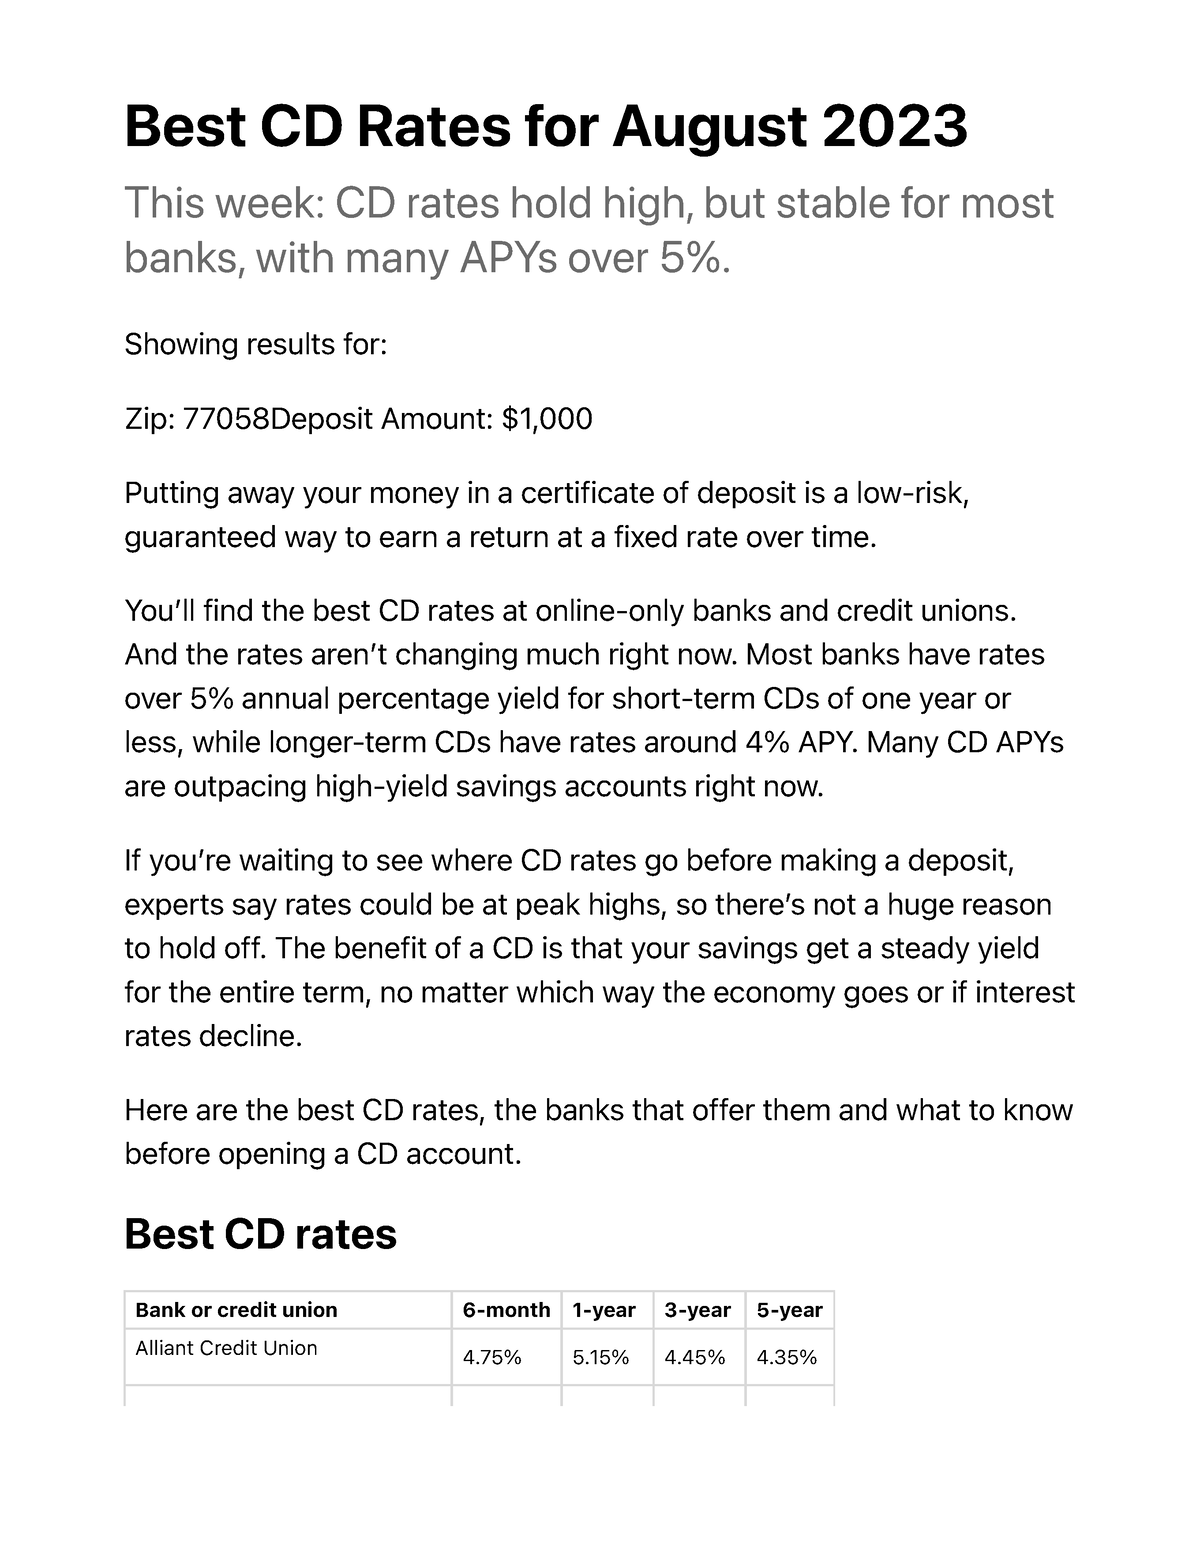 The Best CD Rates for August 2023 Money Best CD Rates for